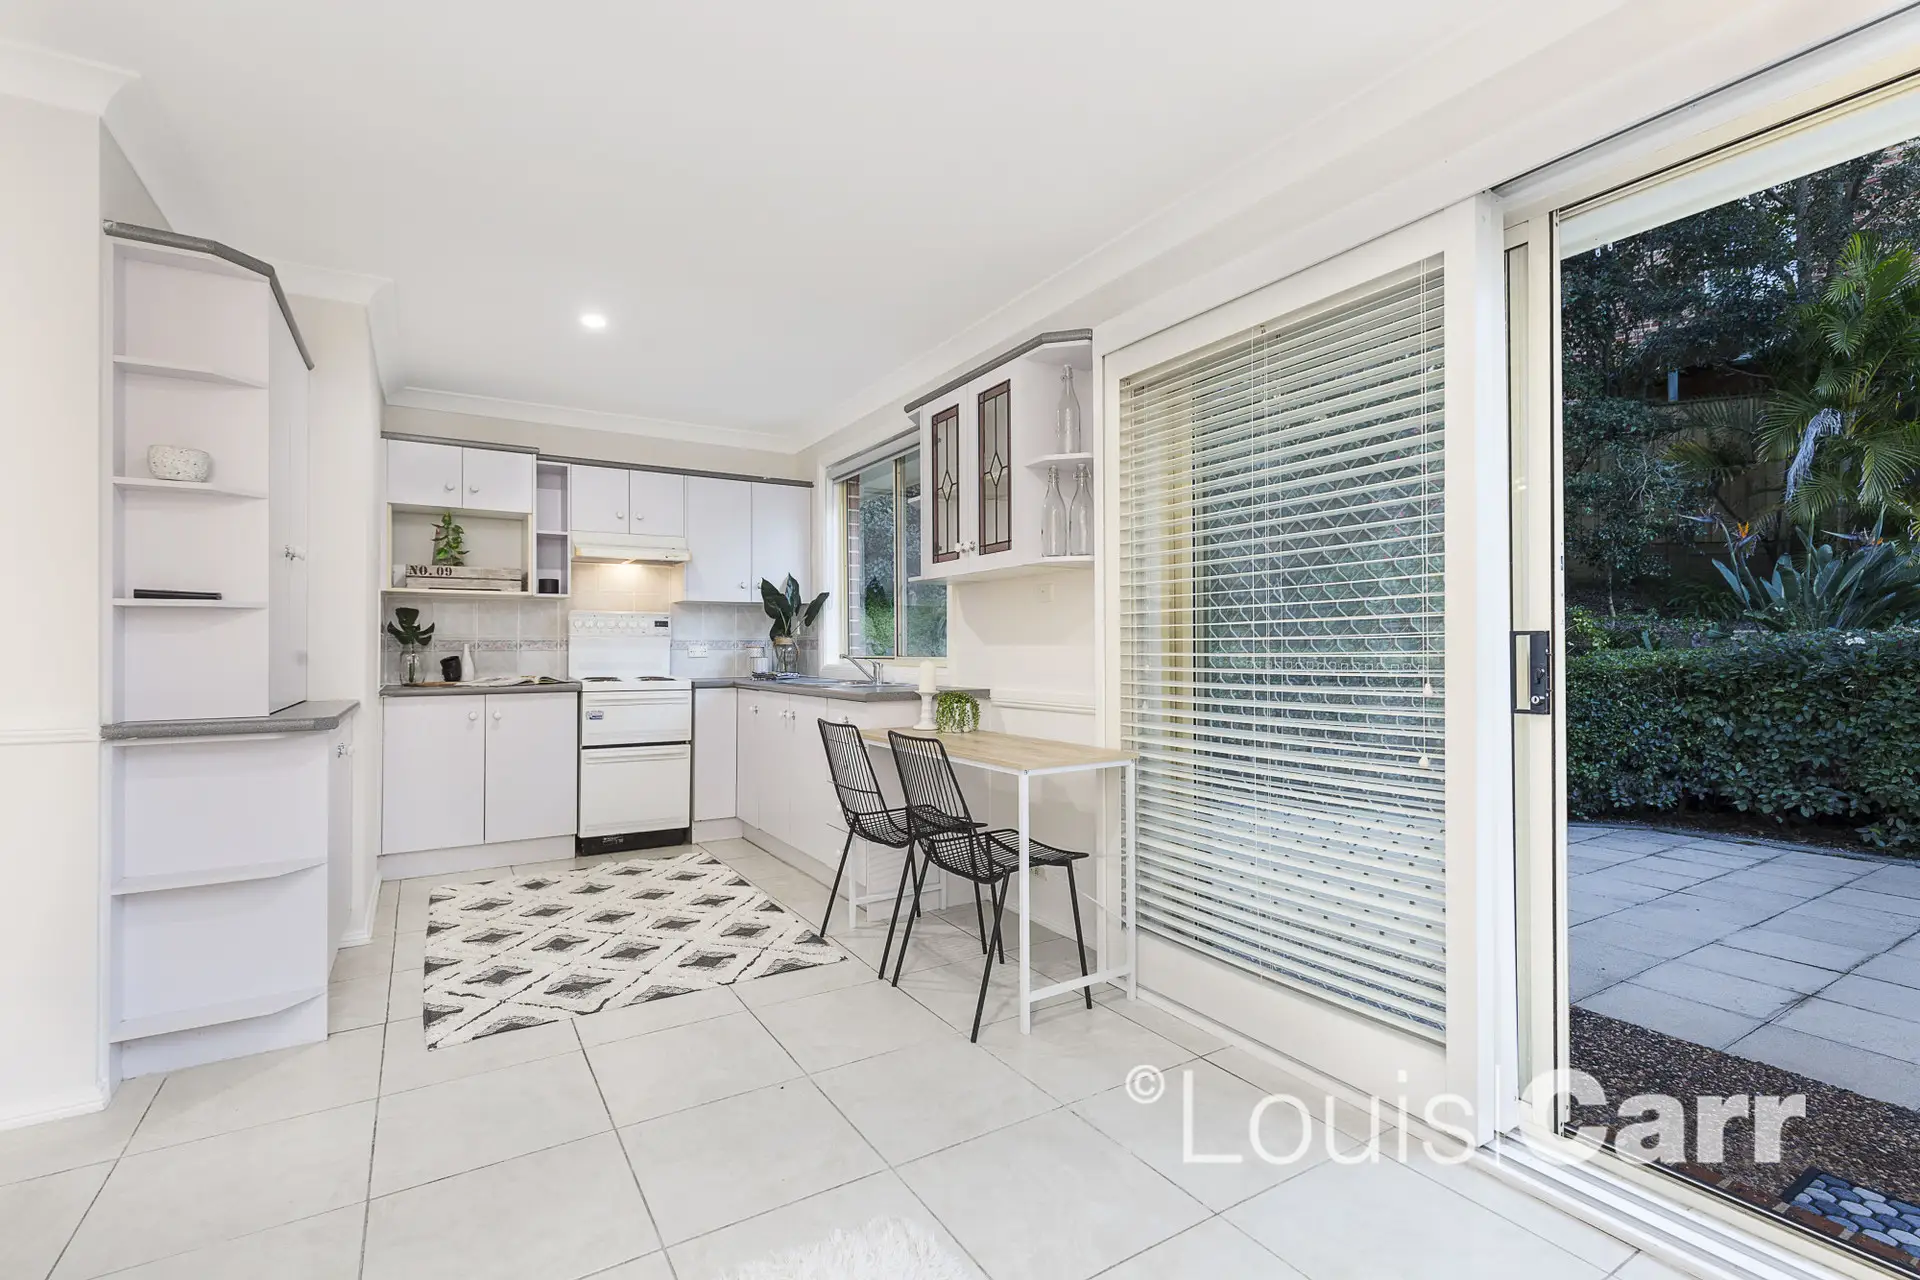 Photo #6: 35 Alana Drive, West Pennant Hills - Sold by Louis Carr Real Estate